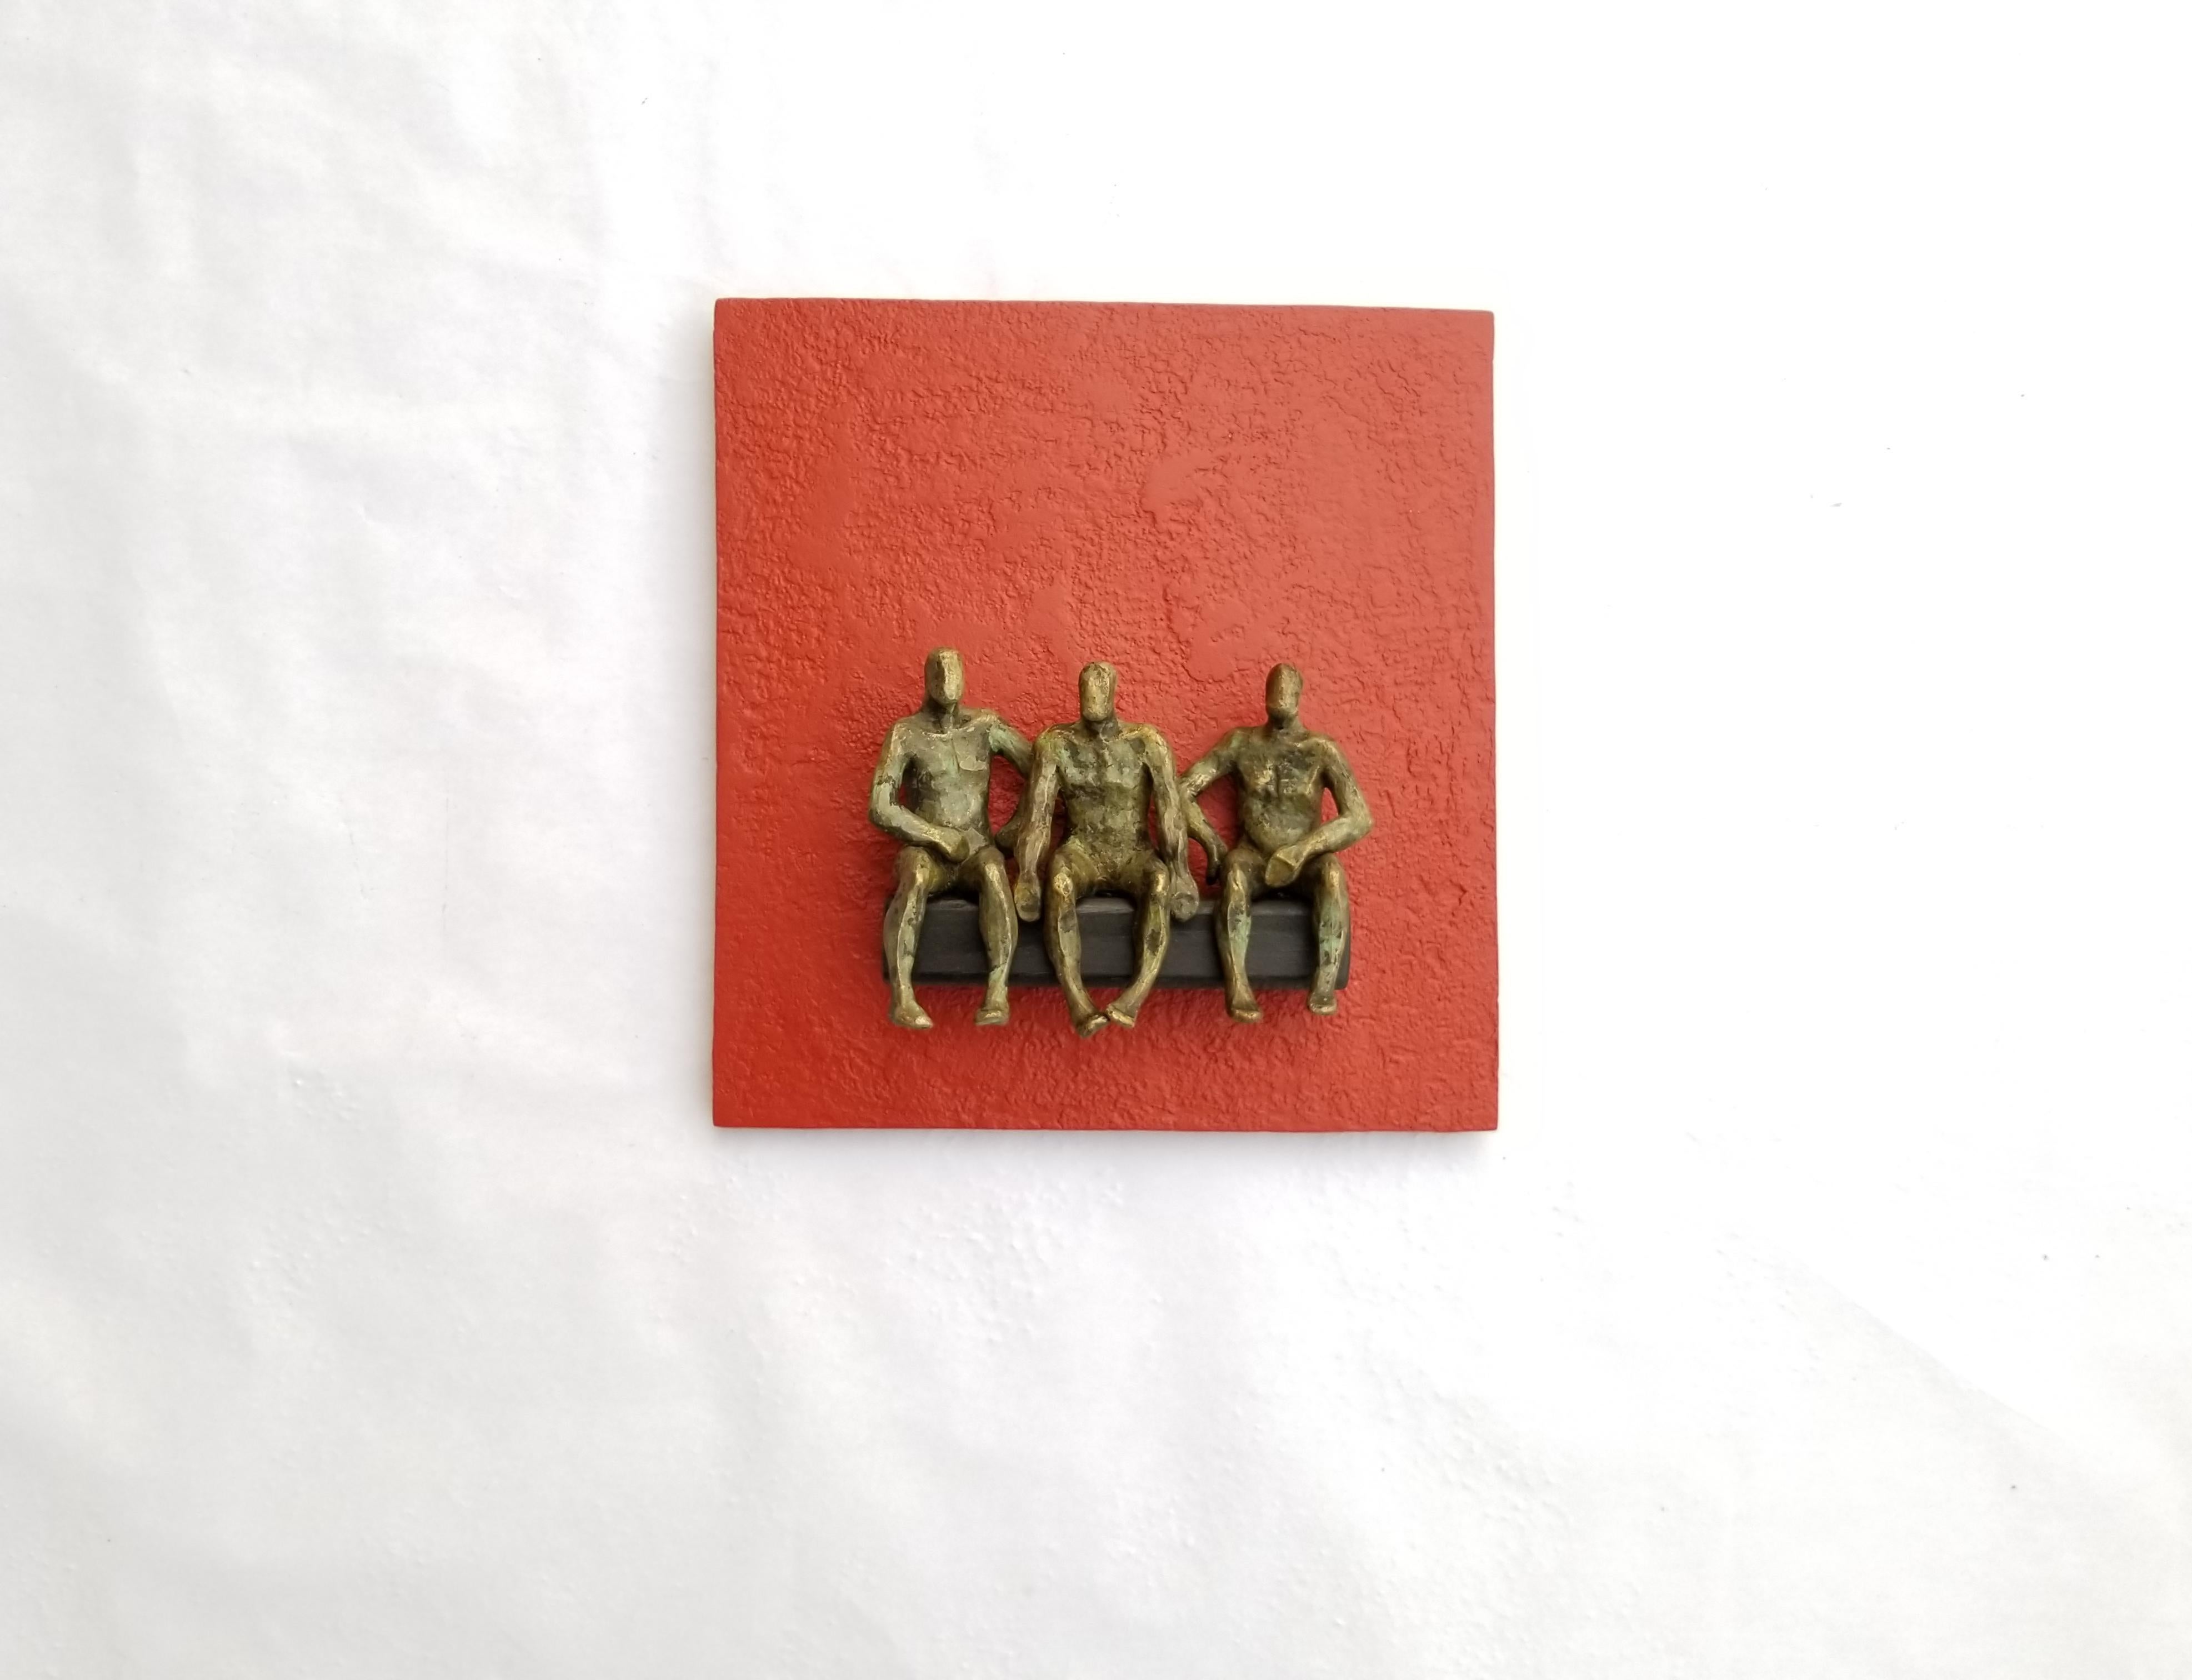 <p>Artist Comments<br>Artist Yelitza Diaz presents three figures sharing a tender moment as they sit on a ledge. 